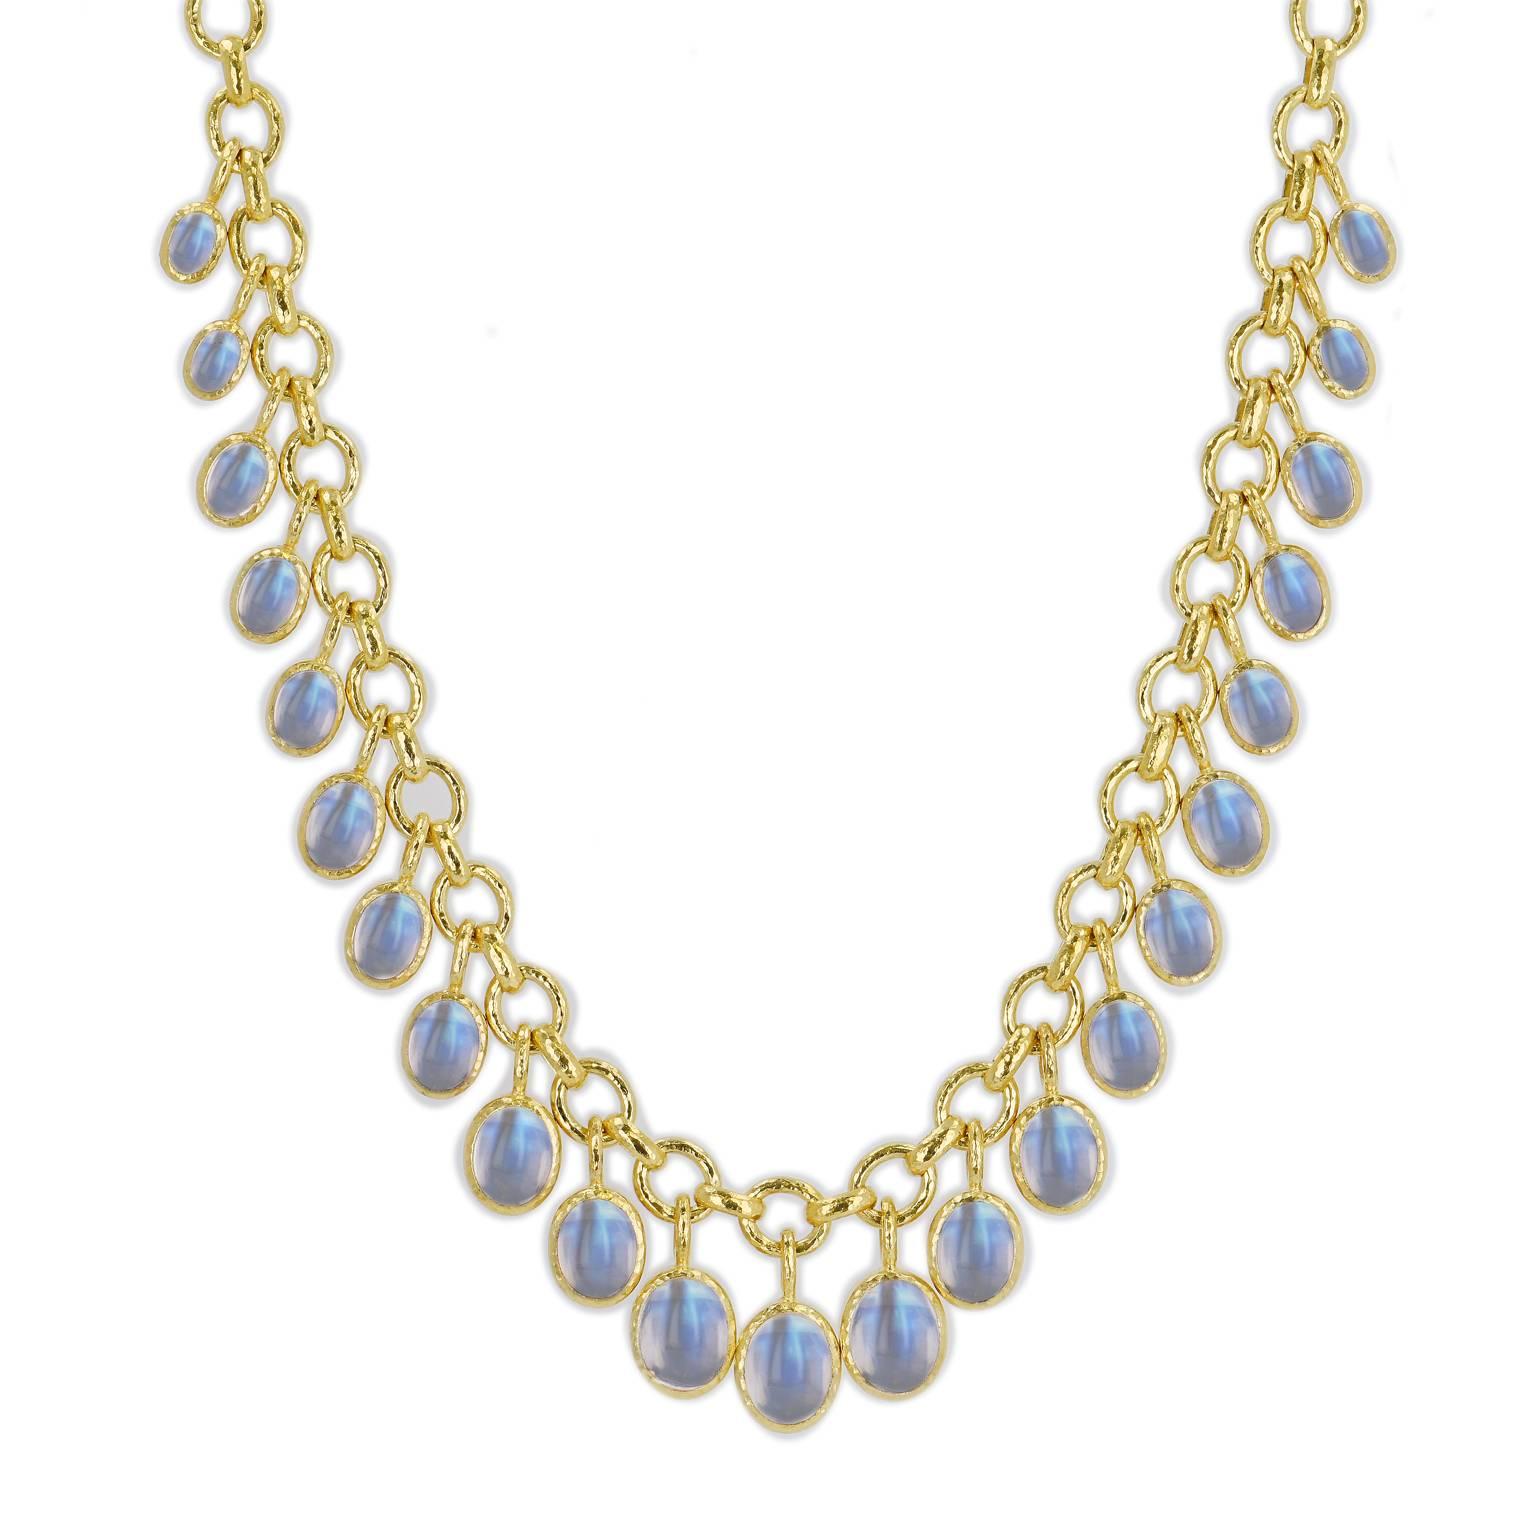 This previously loved 18 karat yellow gold Elizabeth Locke link necklace features twenty-four bezel-set oval-shaped moonstone cabochons and is versatile and chic. Make it your new favorite accessory.